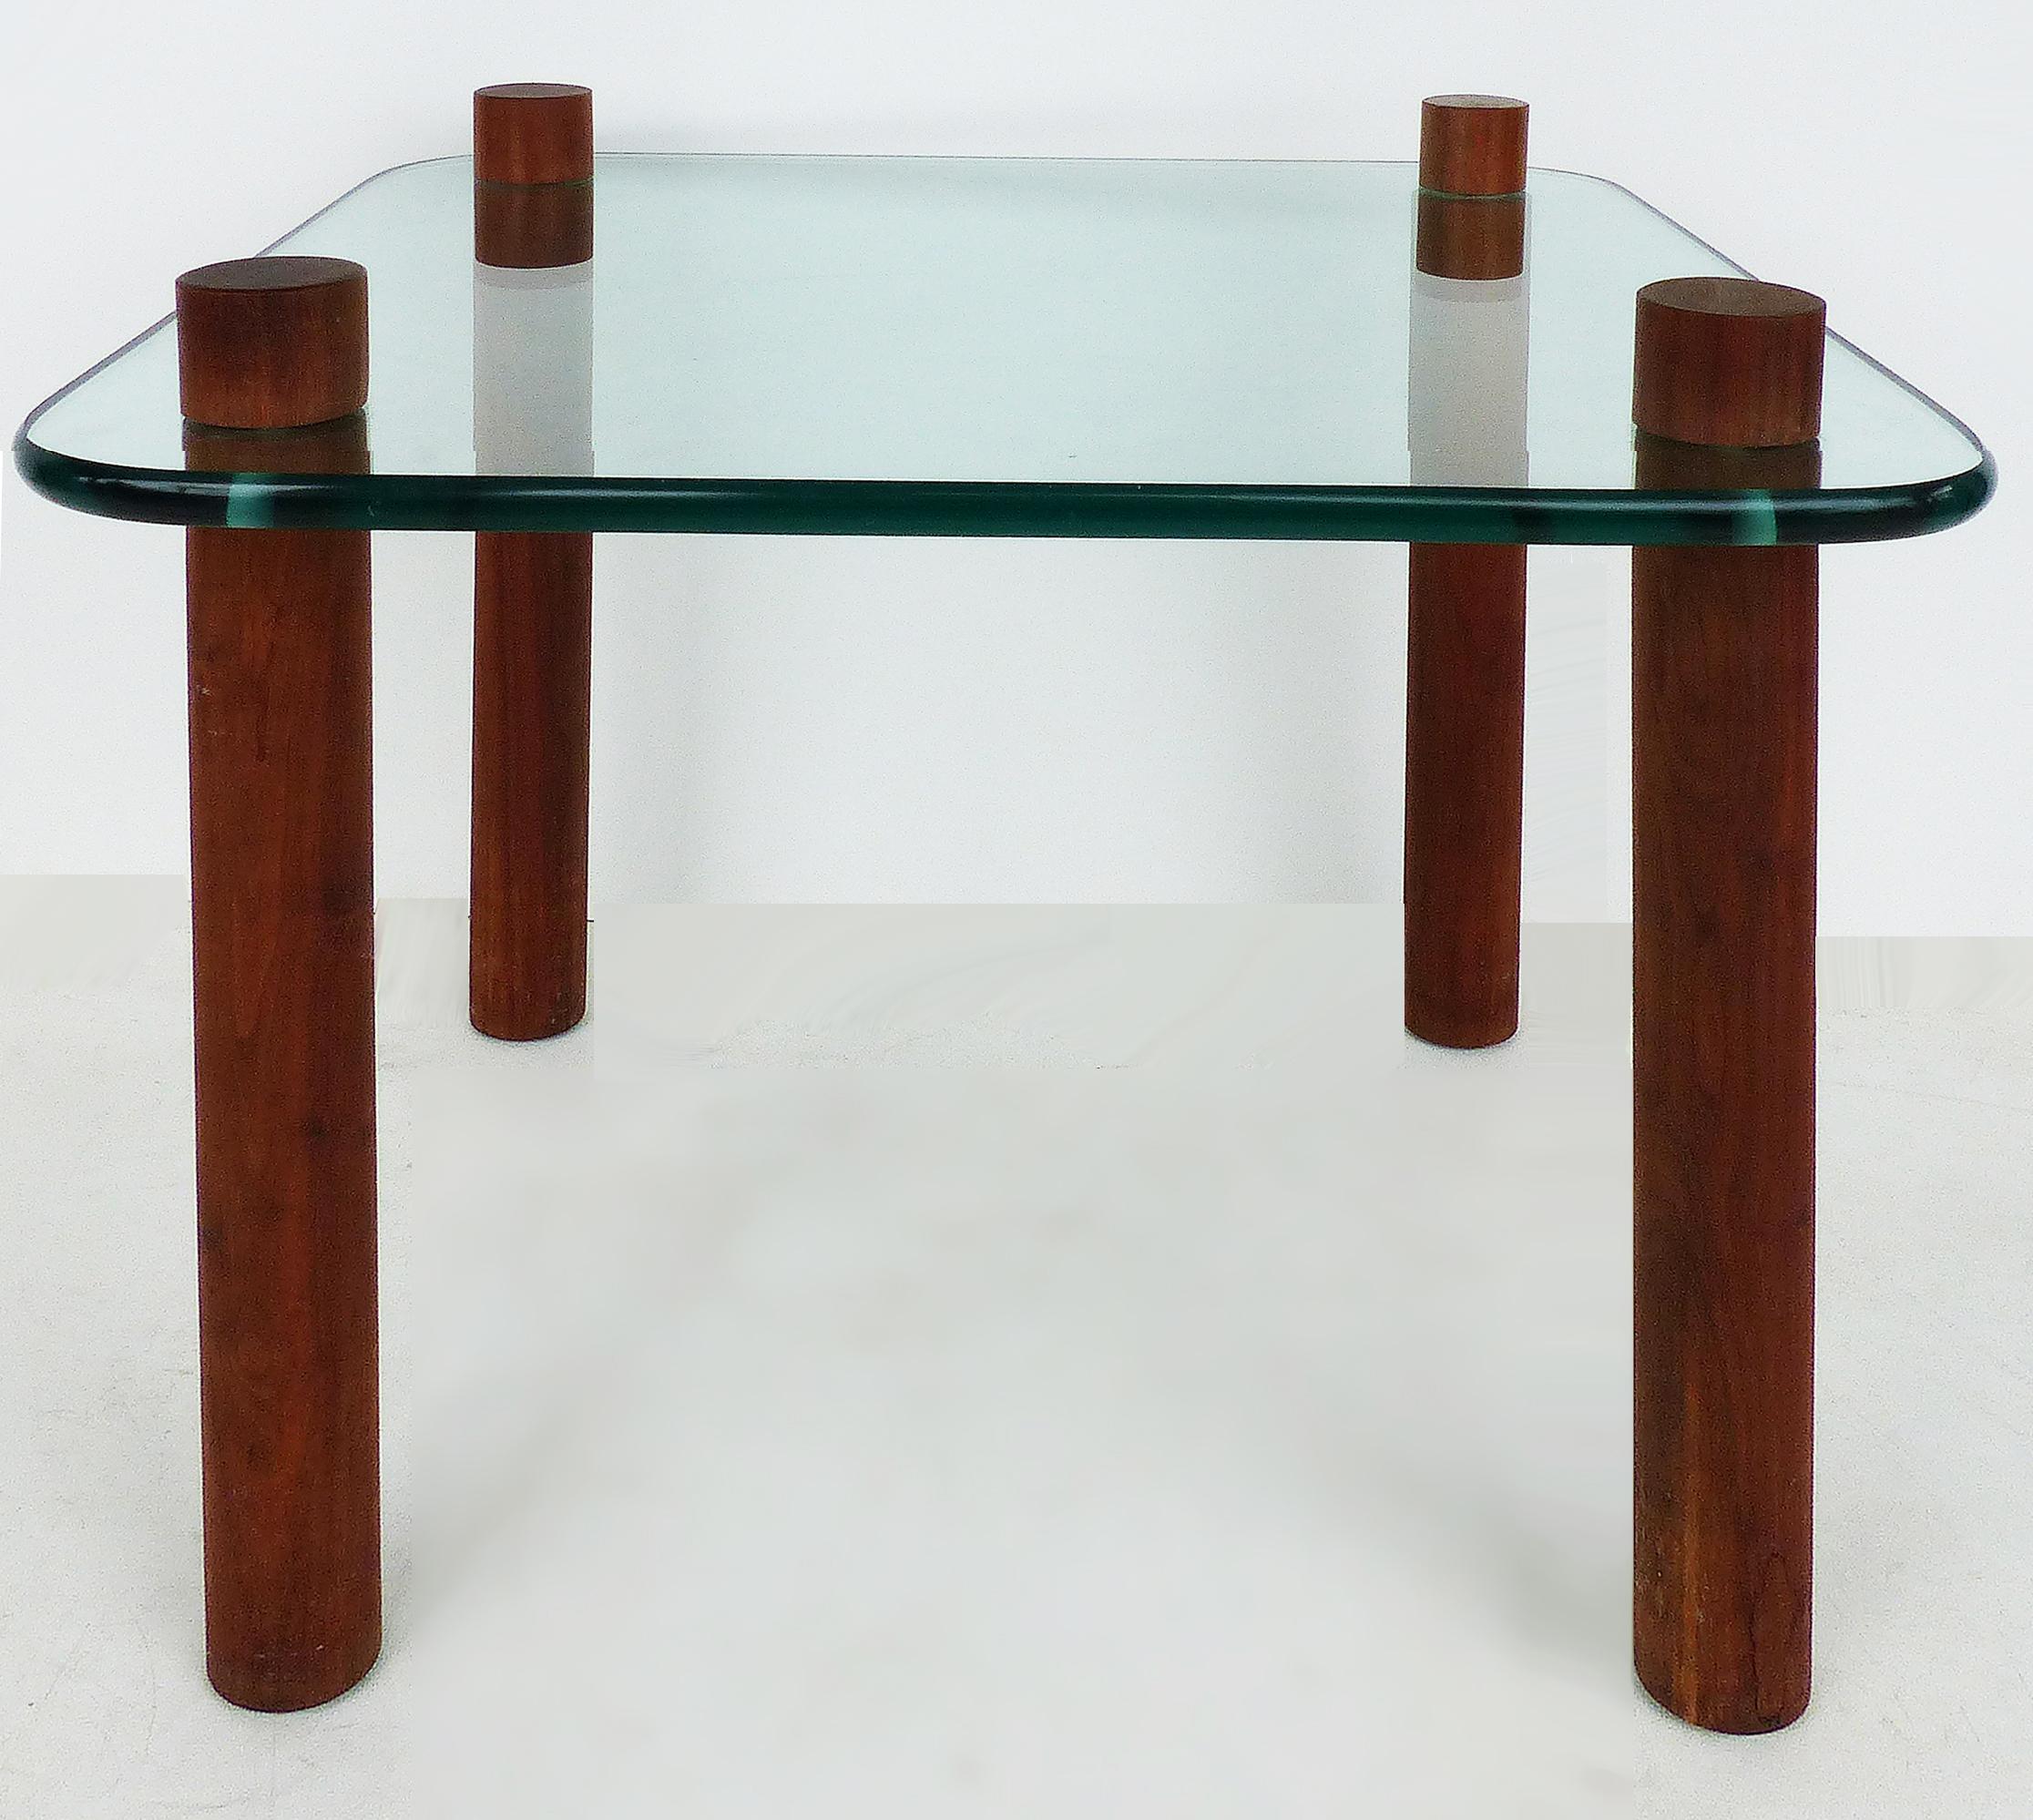 Adrian Pearsall Craft Associates side tables in wood and glass

Offered is a pair of Adrian Pearsall Craft Associates circa 1965 wood dowel and glass side tables with rounded edge thick glass tops. This pair of tables is part of a